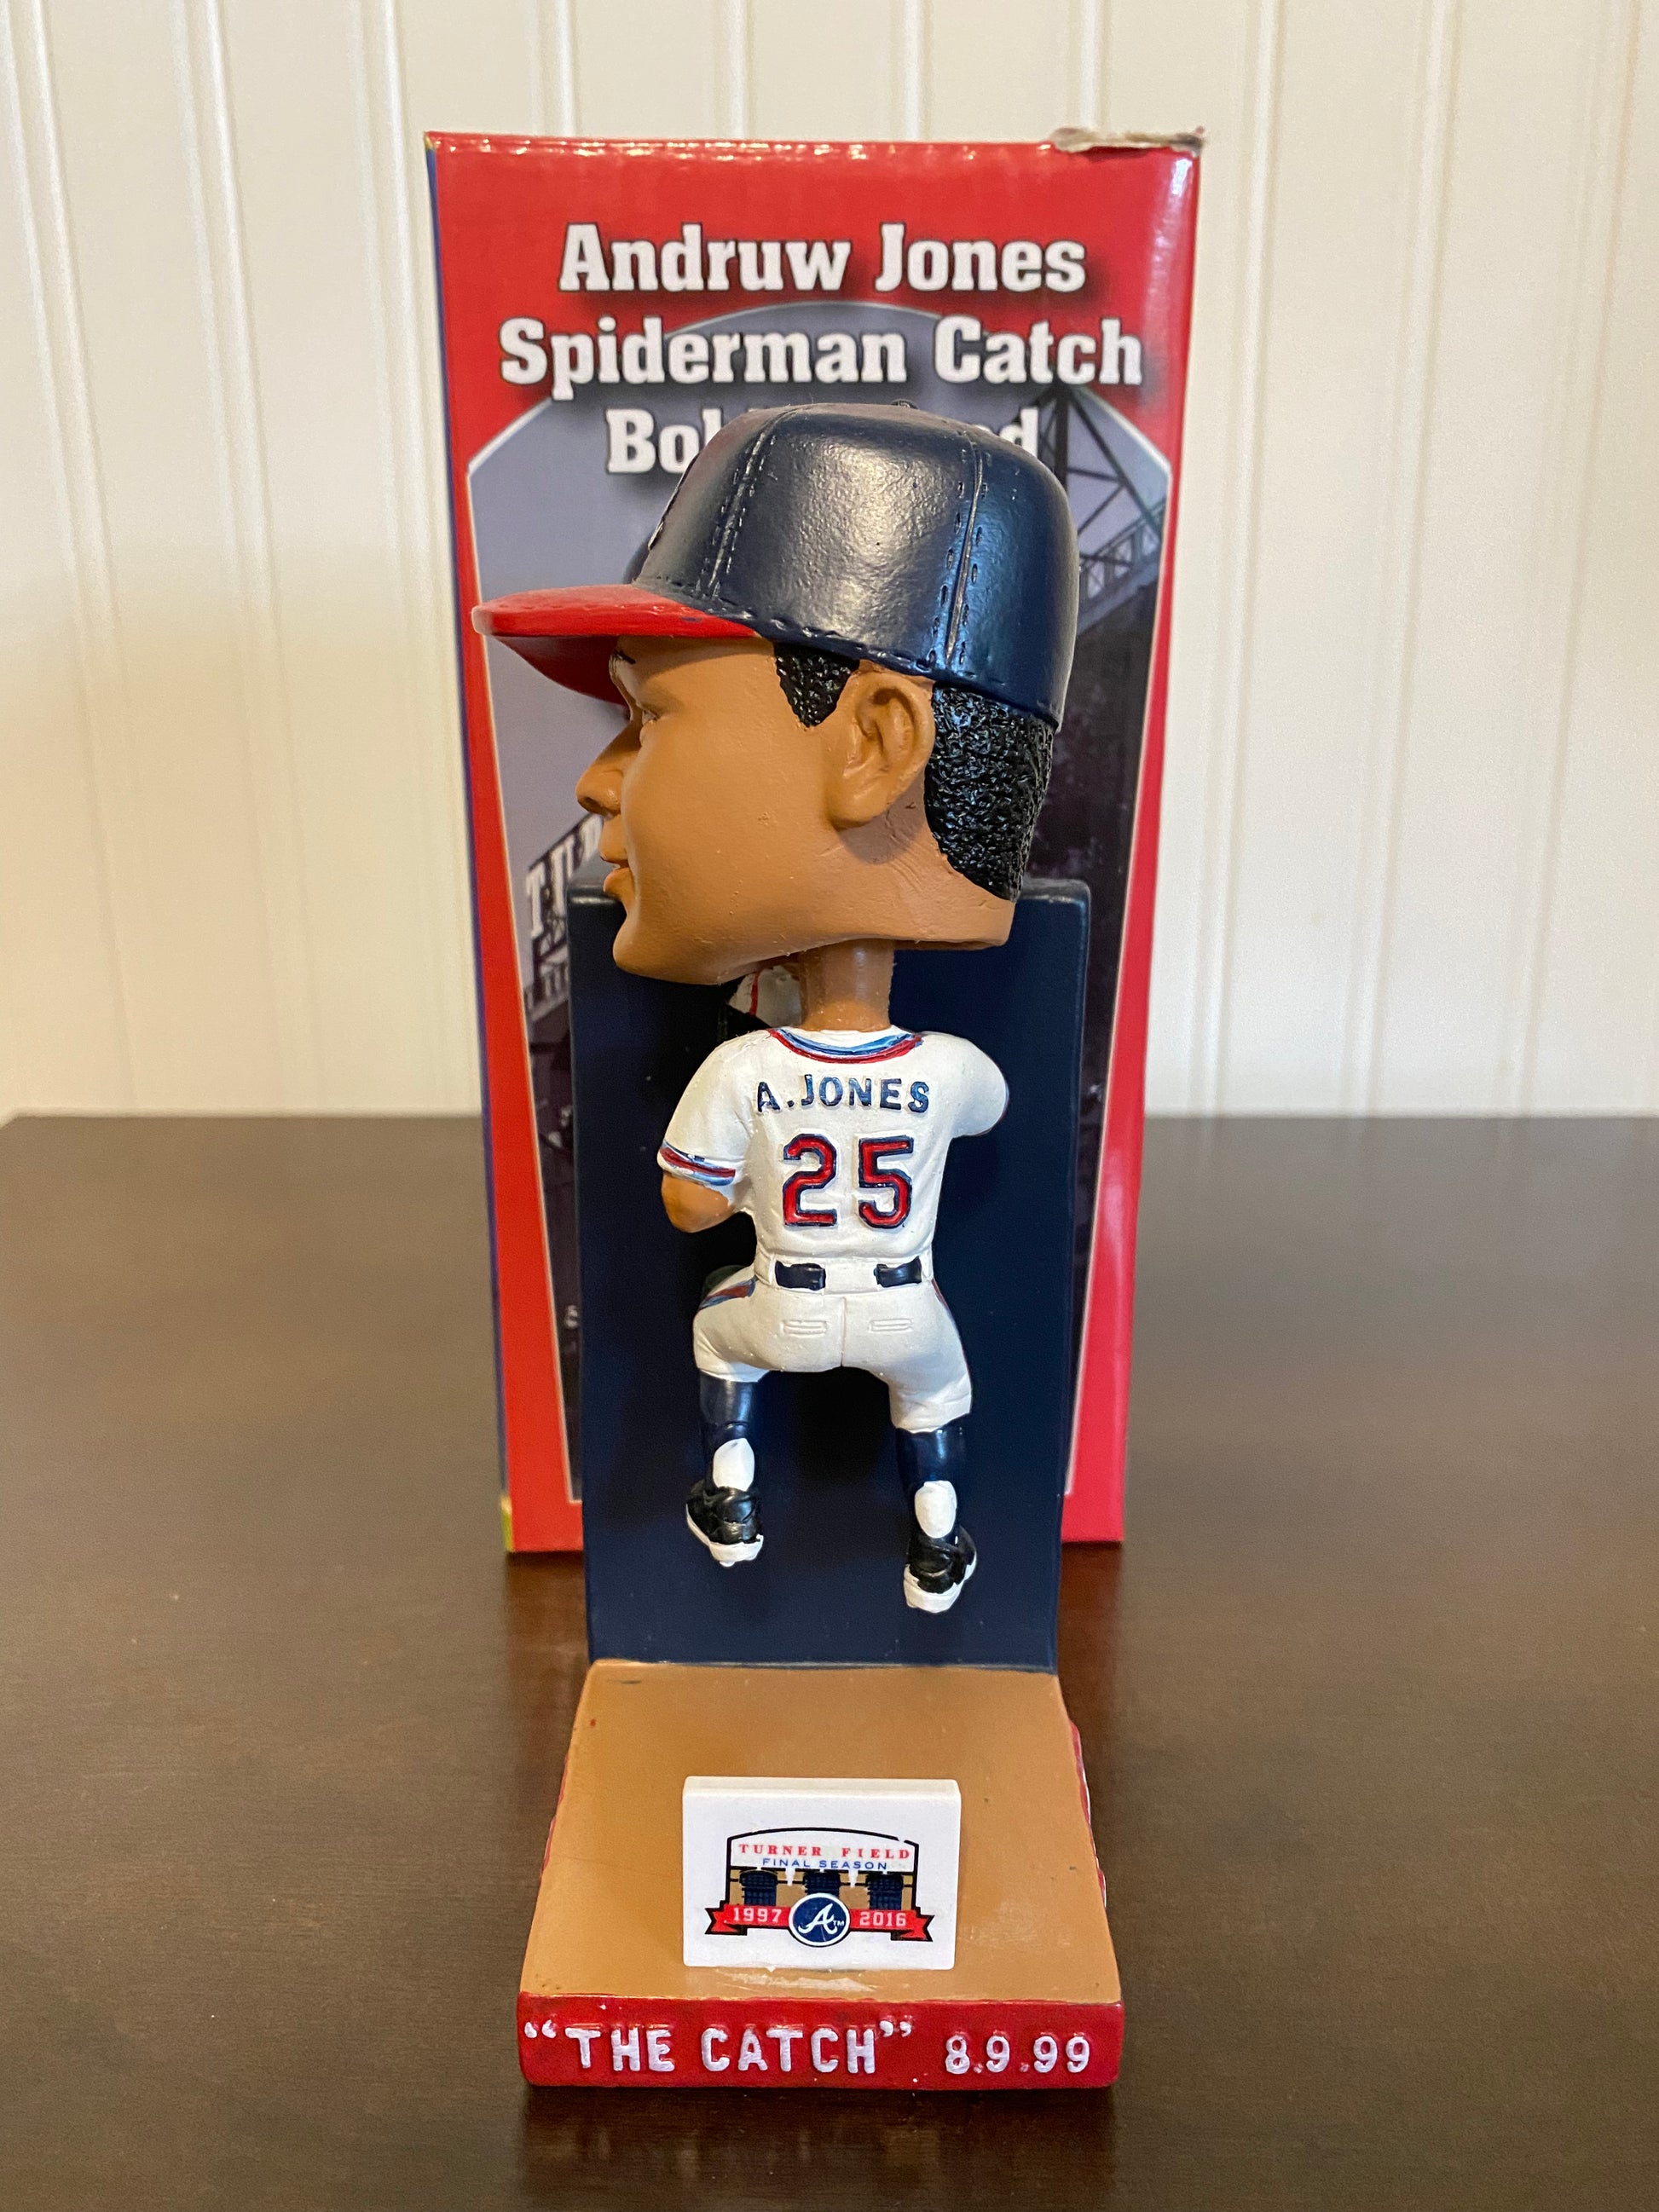 Free Andruw Jones Spiderman Catch Bobblehead Day At Turner